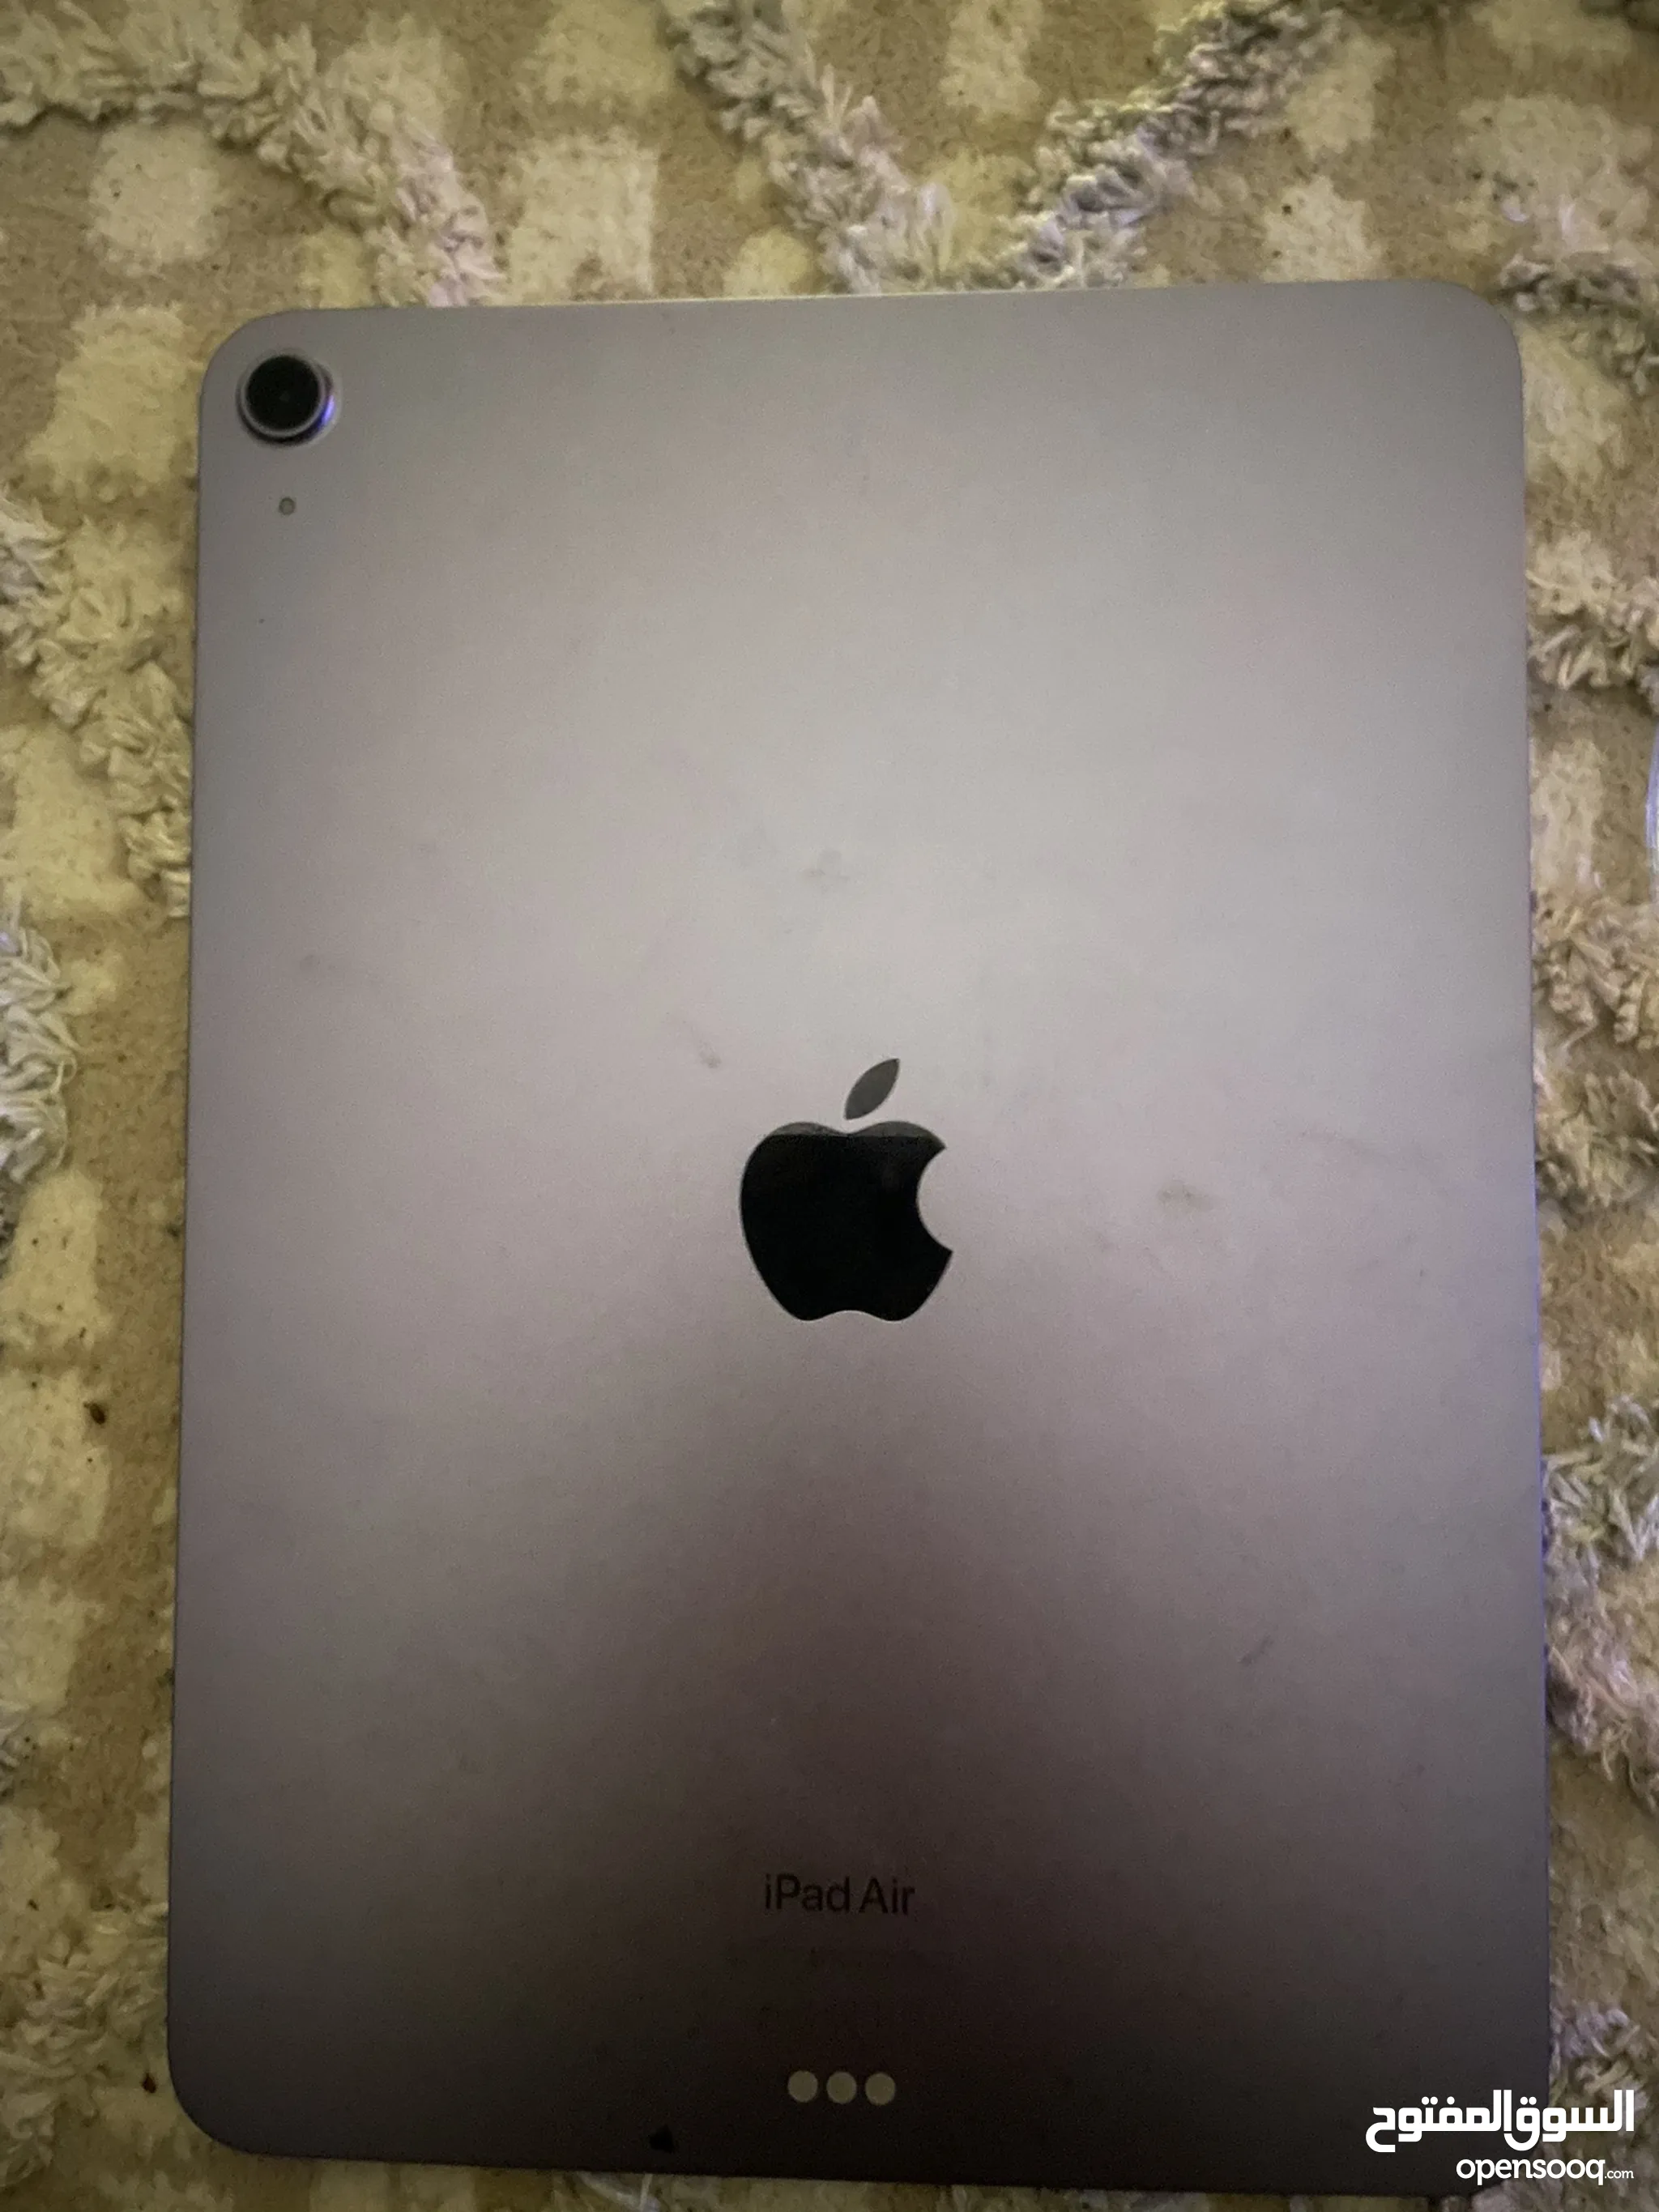 Apple Tablets For Sale in Taif: Used & New: Best Prices